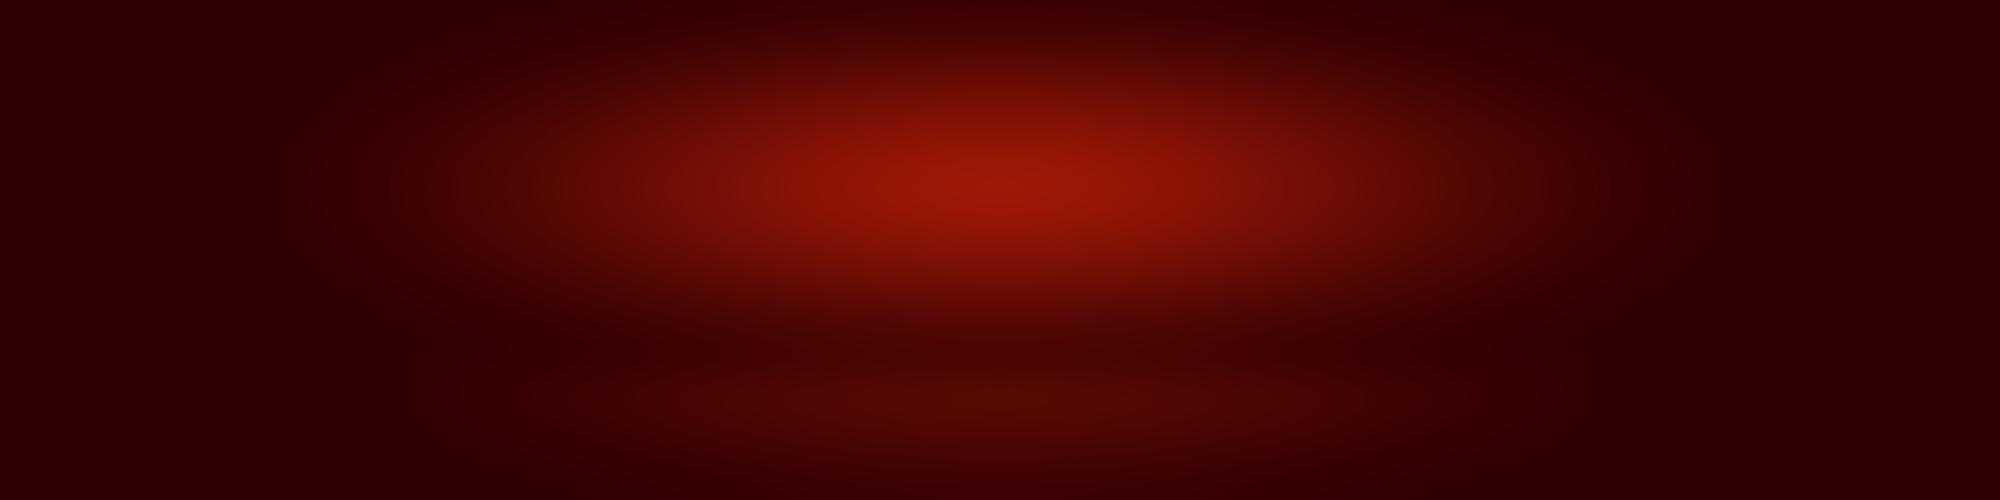 A red background with an empty space - Dark red